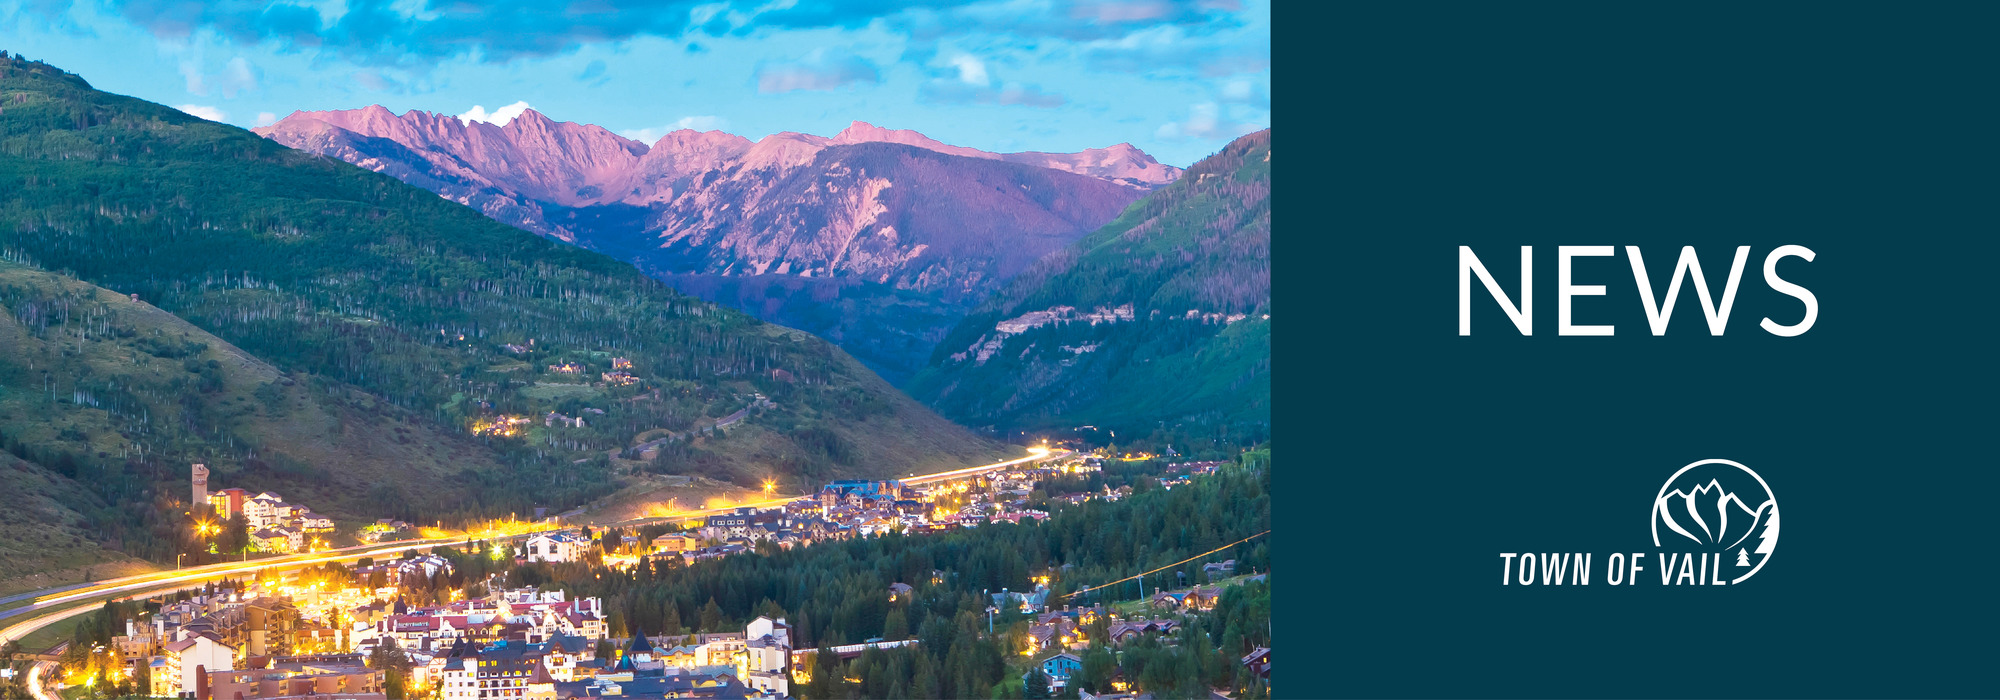 News and Updates from the Town of Vail